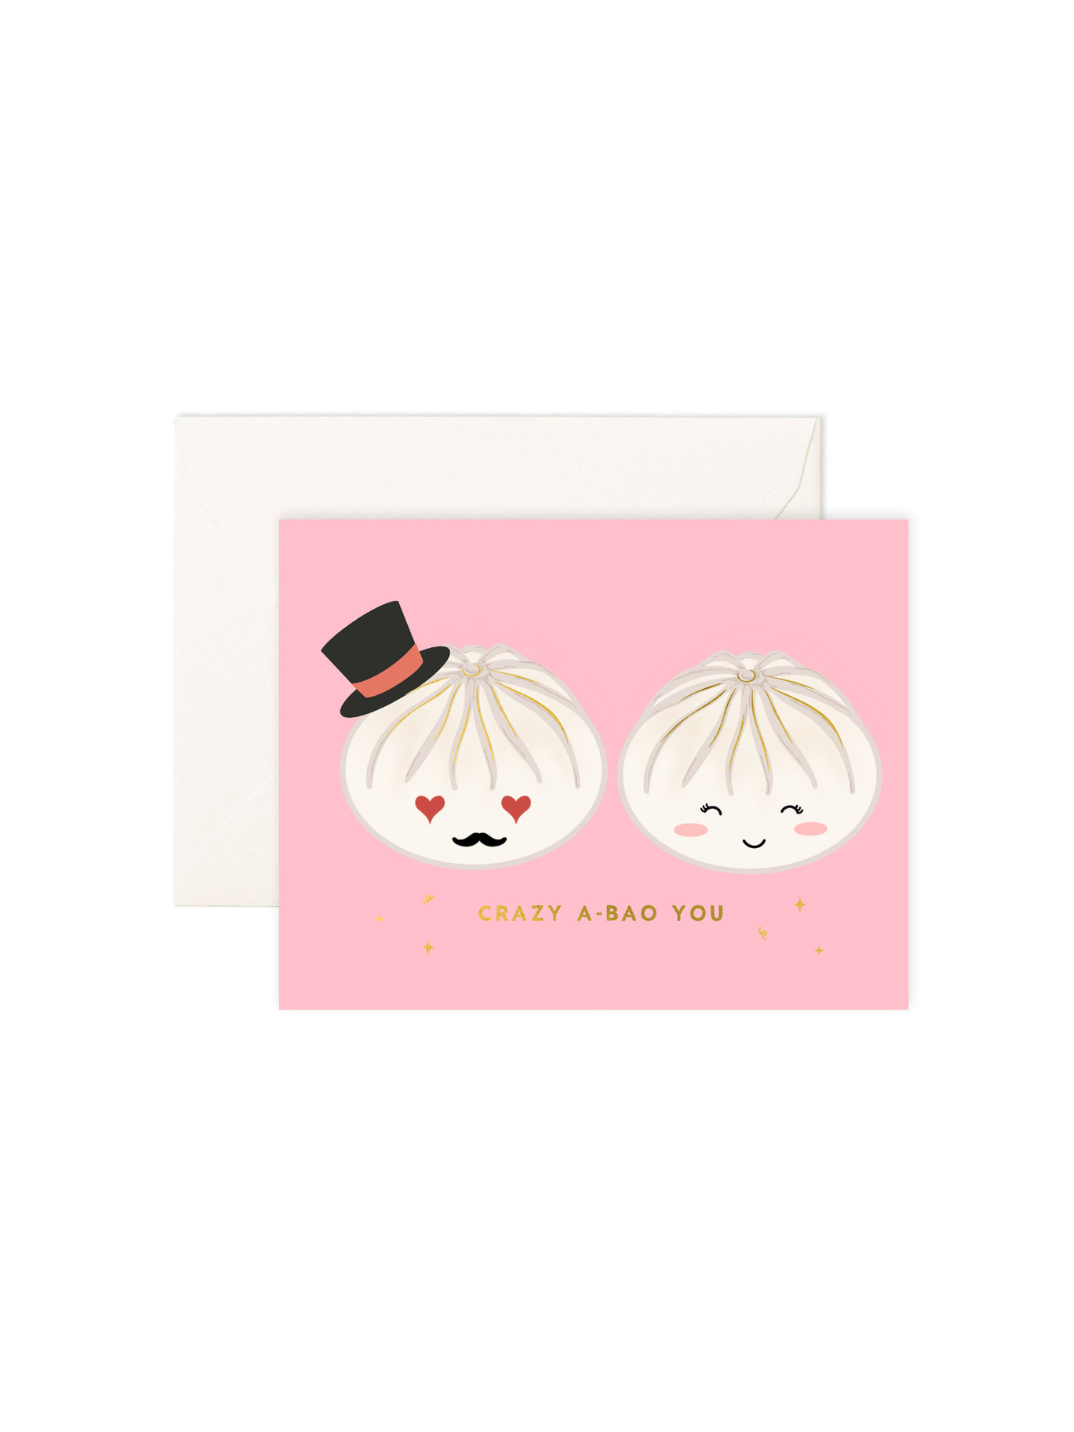 Eco-friendly greeting card printed on recycled paper cute food-inspired design shop sustainable ethical brands women-owned brands kind on the planet wedding anniversary love greeting card